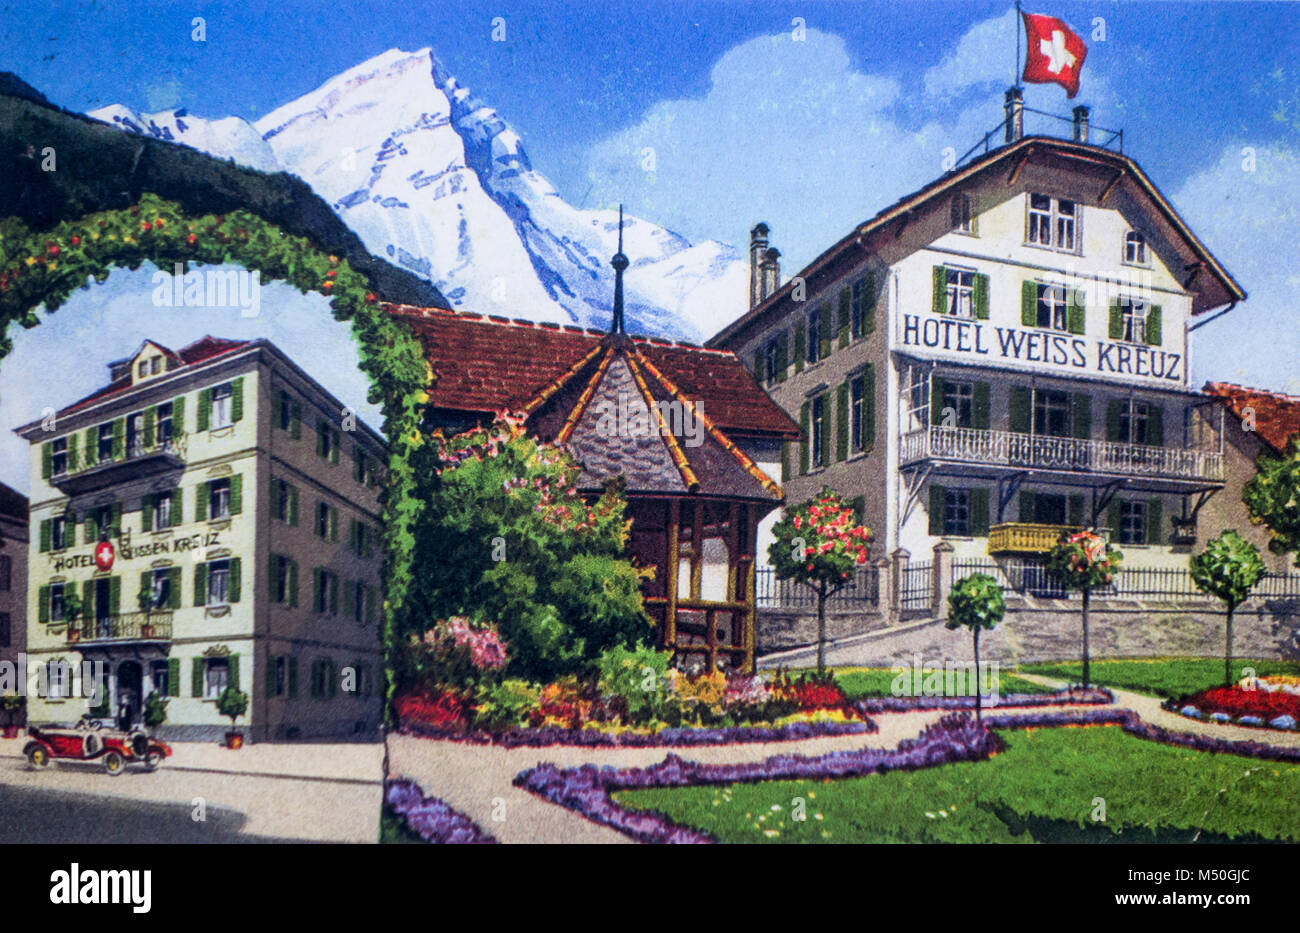 Vintage postcard of the early 20th century showing drawing of Hotel Weiss Kreuz in Swiss holiday destination, Switzerland Stock Photo